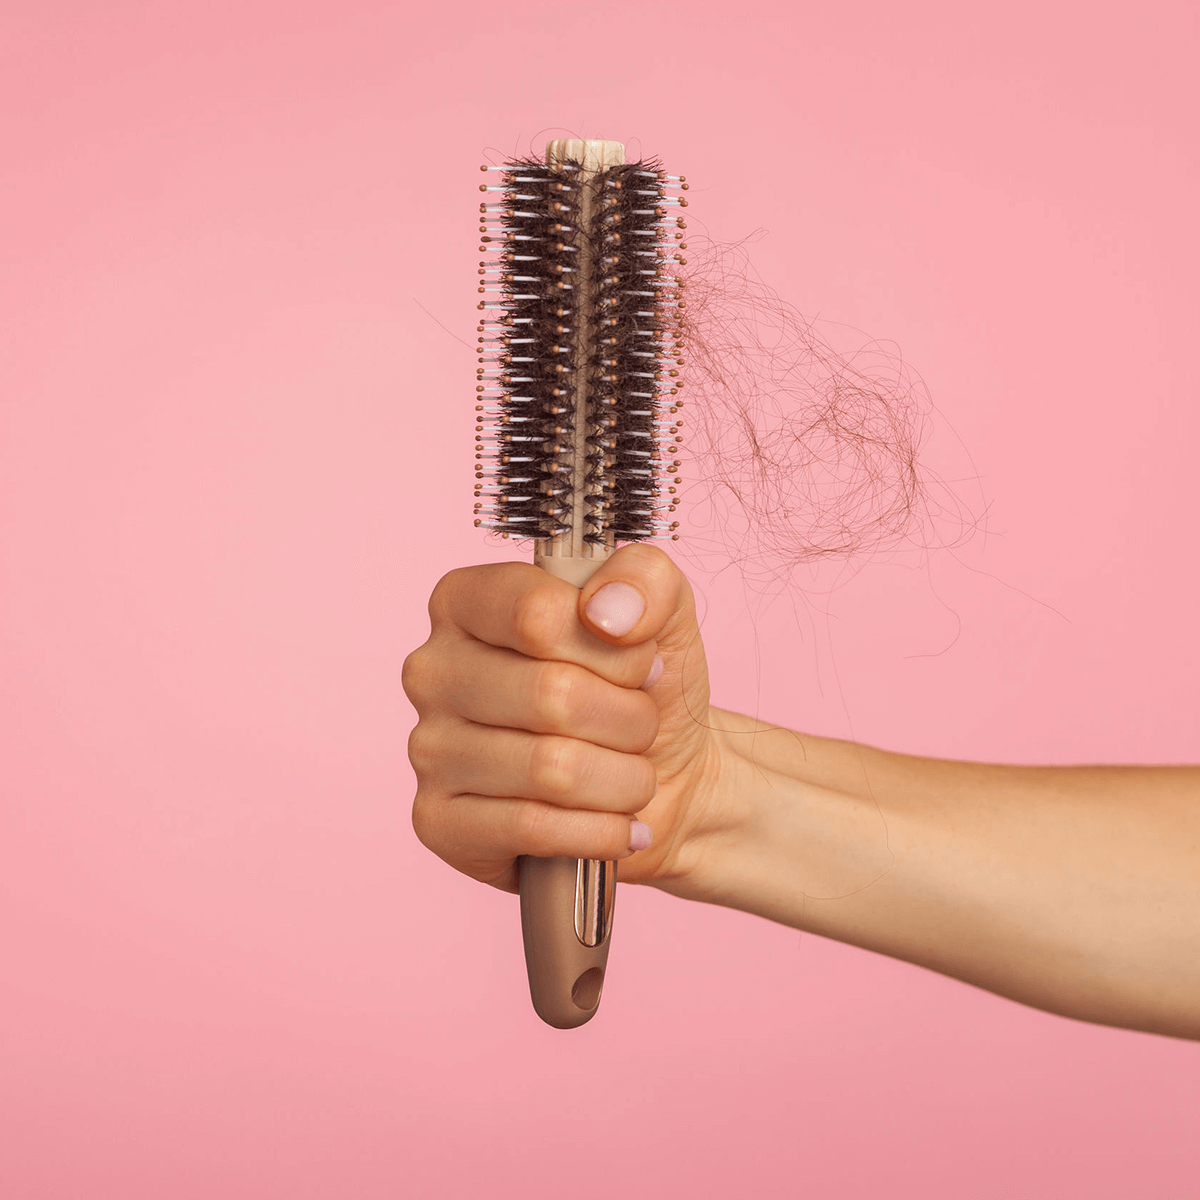 Picture of hand holding hair brush